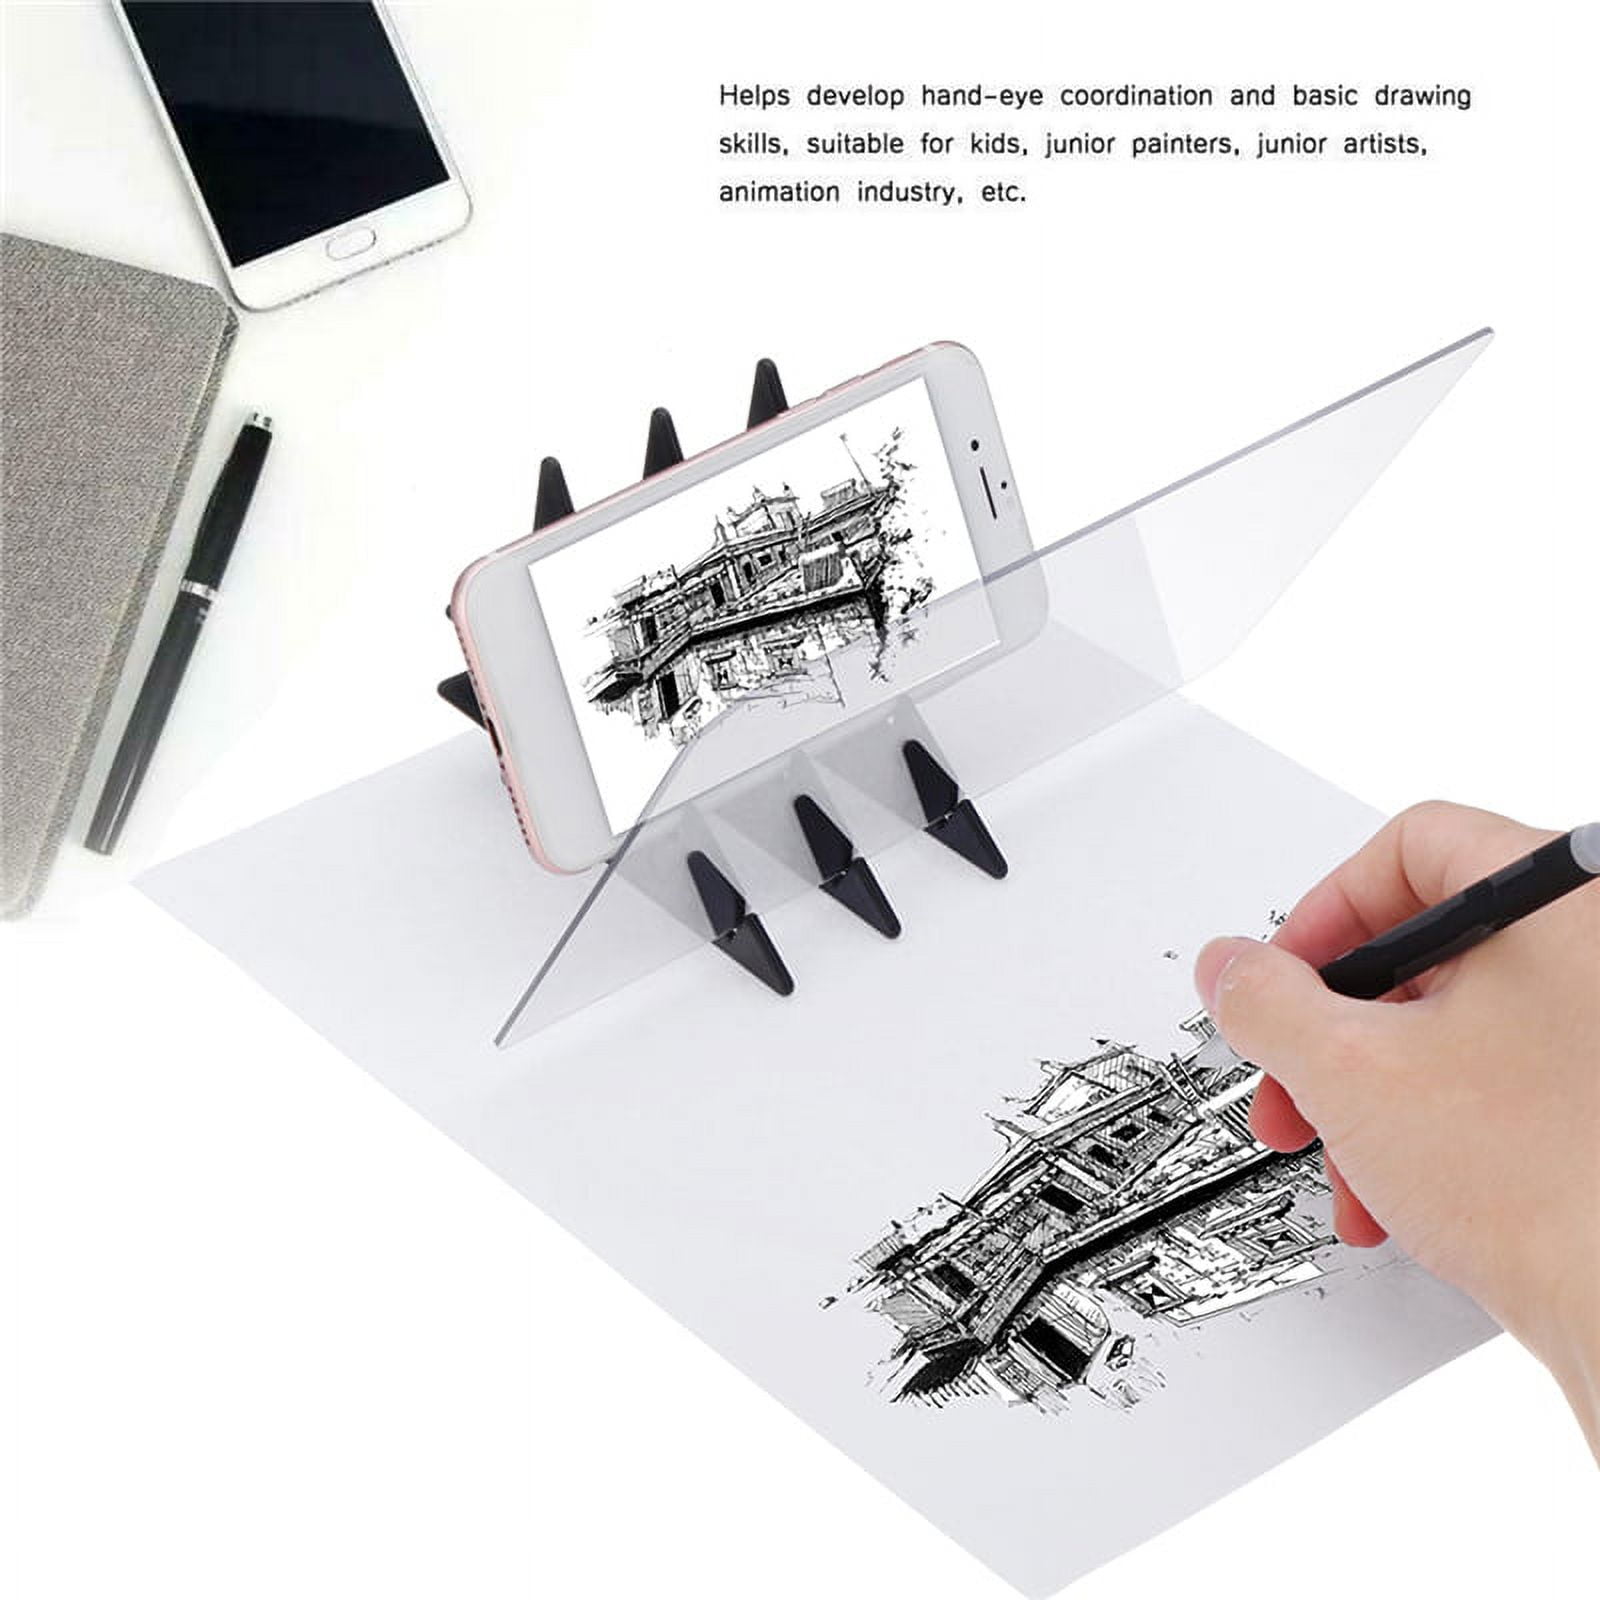 East Buy Optical Drawing Board - Portable Tracing and Sketch Projector Sketching Painting Tool, Tool for Kids Adults Beginners Artists